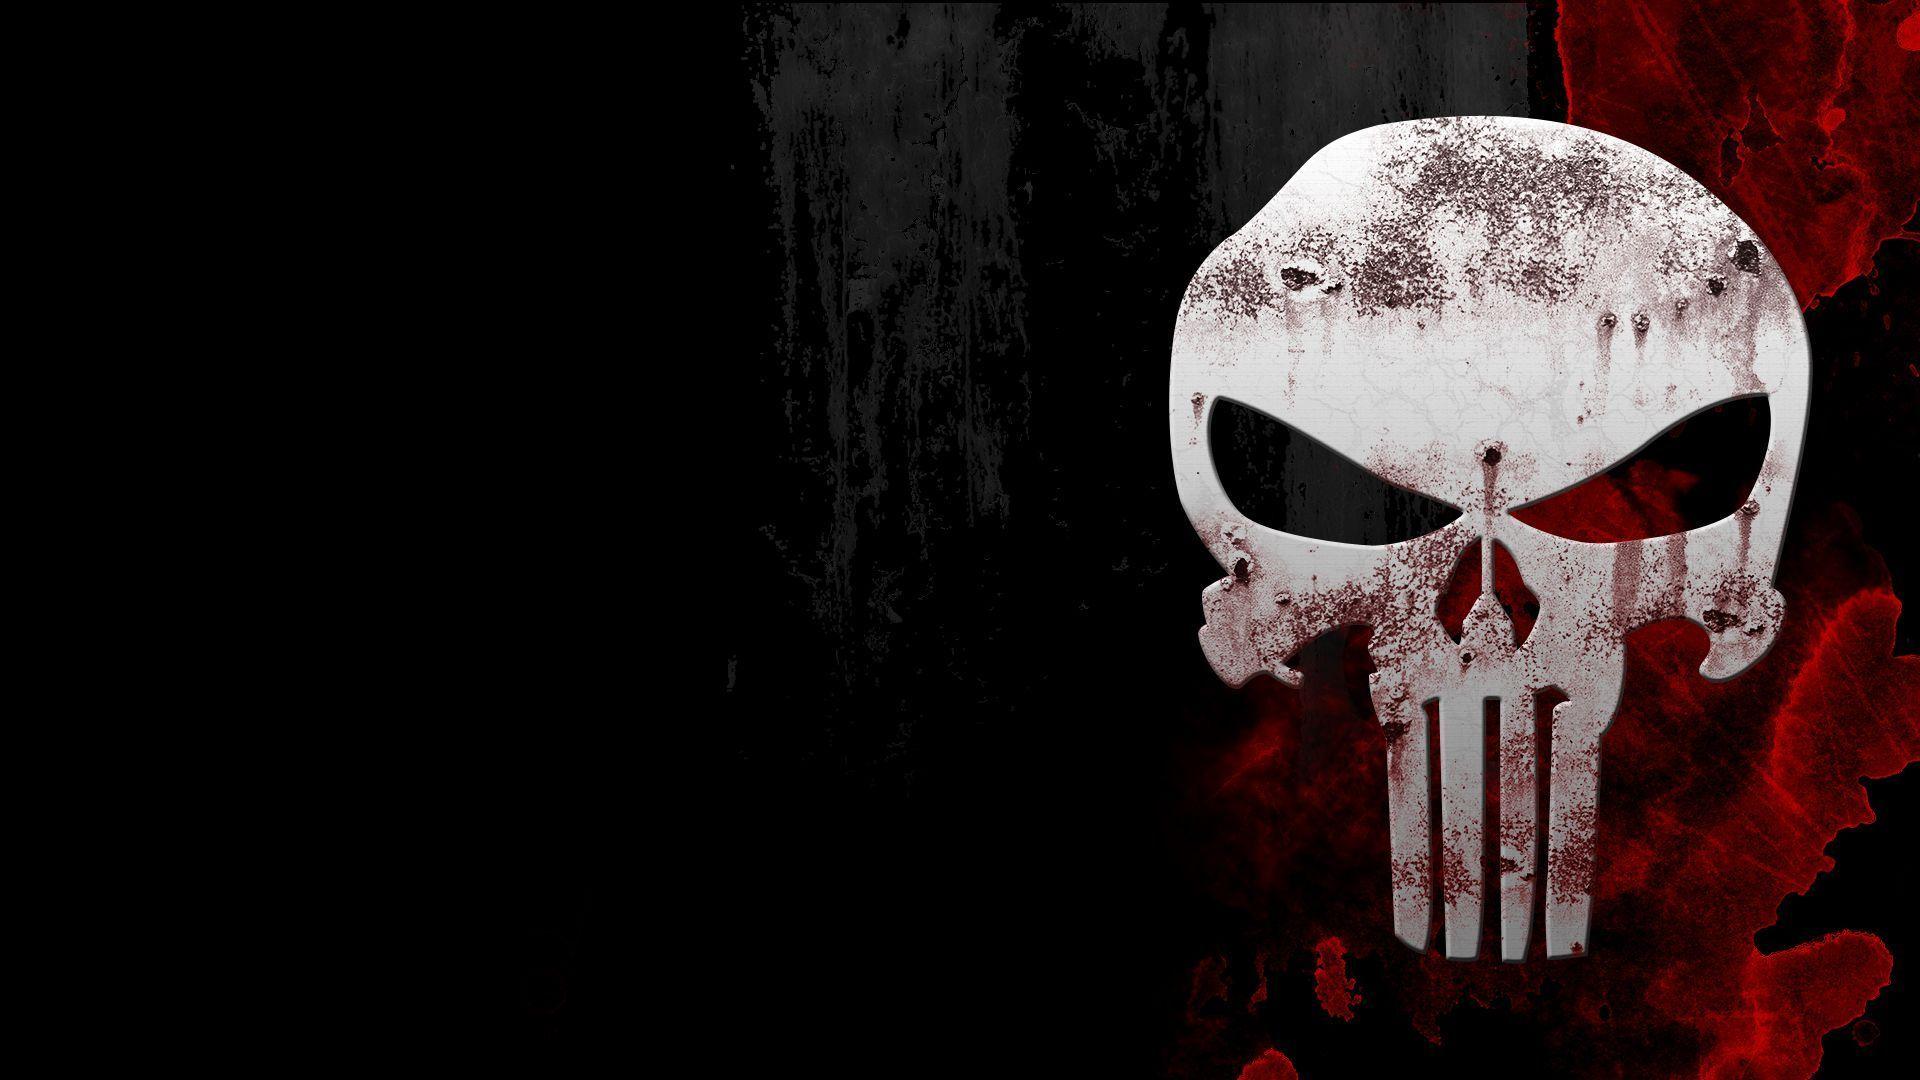 Punisher Wallpaper, PC 42 Punisher Photo, Top4Themes